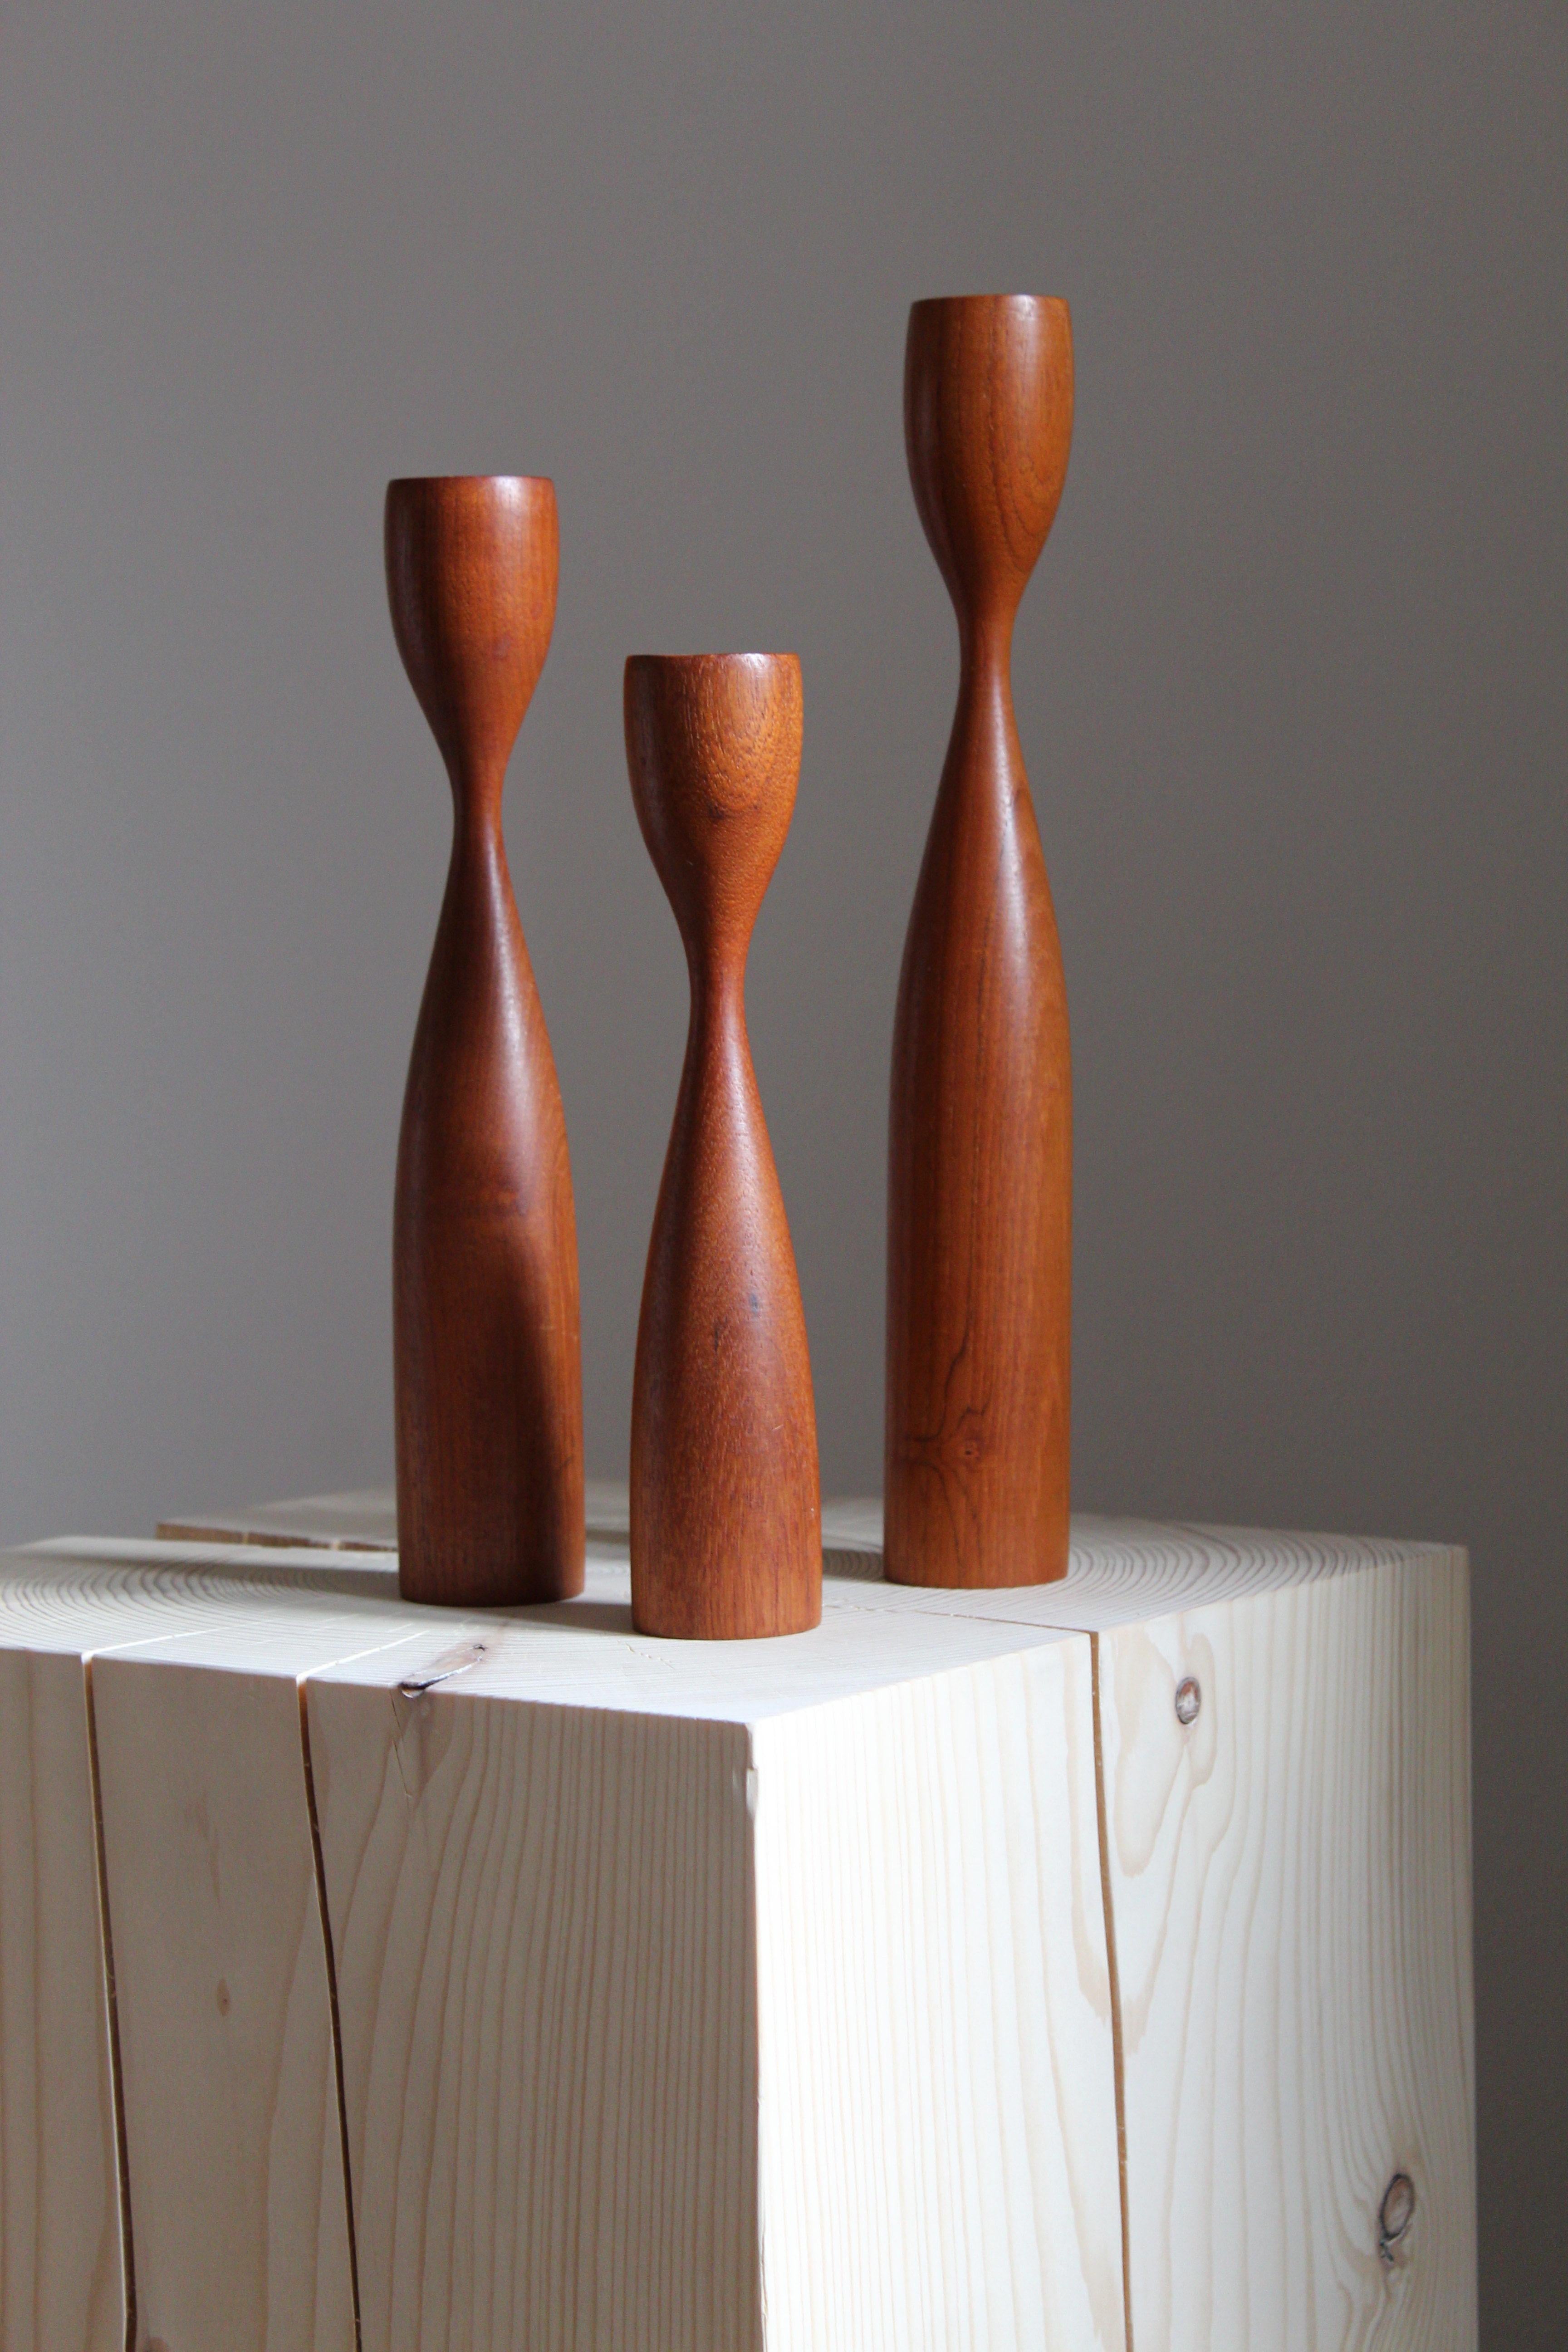 A pair of sculptural organic candlesticks designed and produced in Denmark, 1950s.